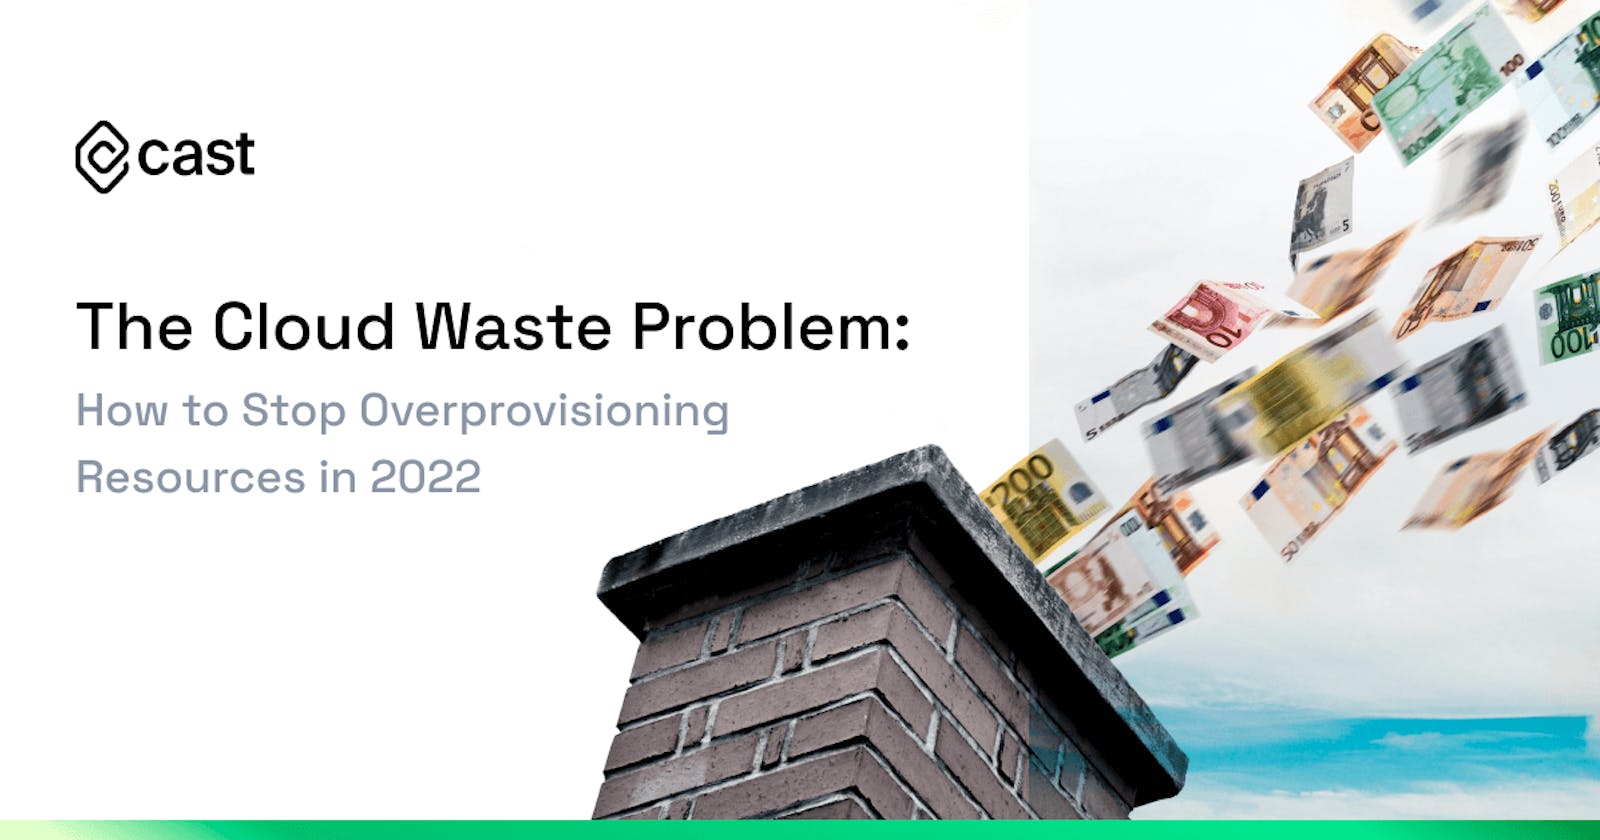 The Cloud Waste Problem: How to Stop Overprovisioning Resources in 2022